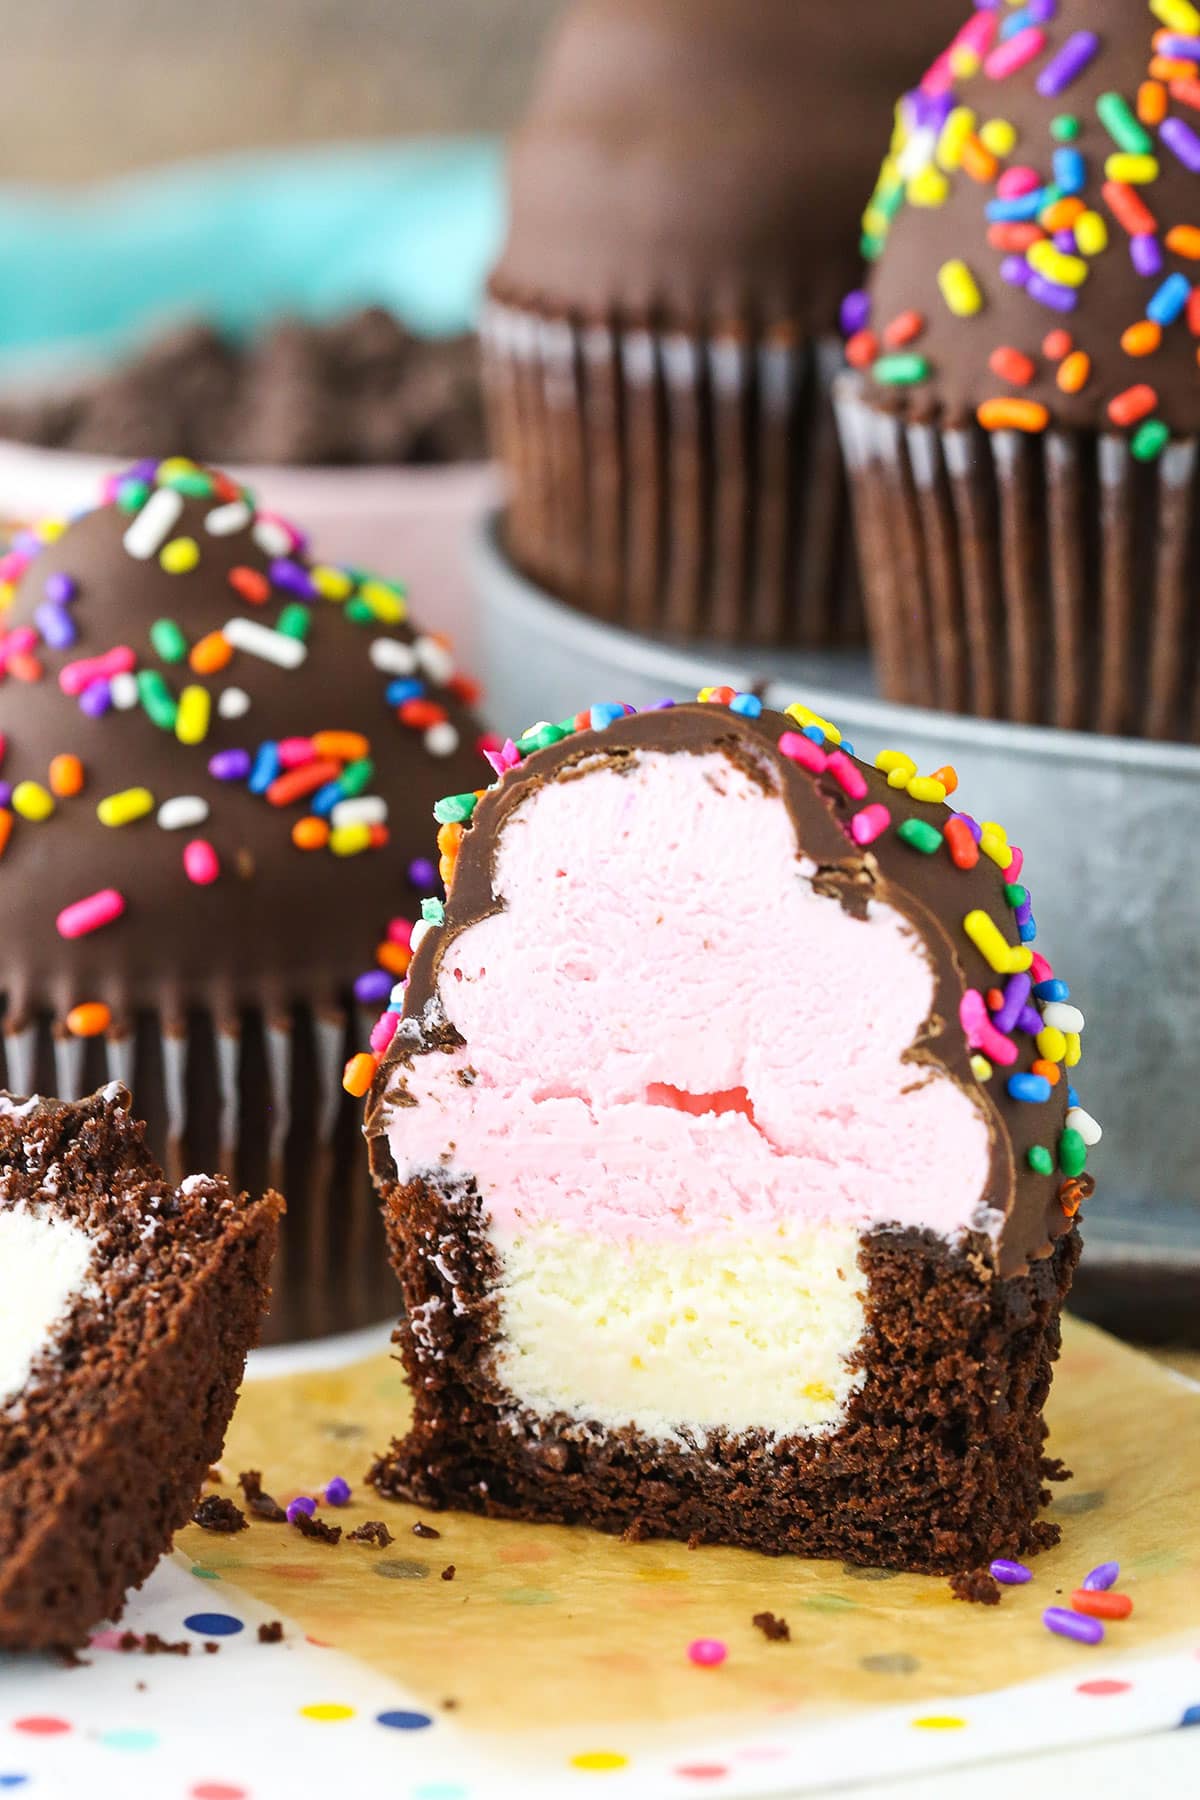 An Ultimate Ice Cream Chocolate Cupcake cut in half showing the inner textures